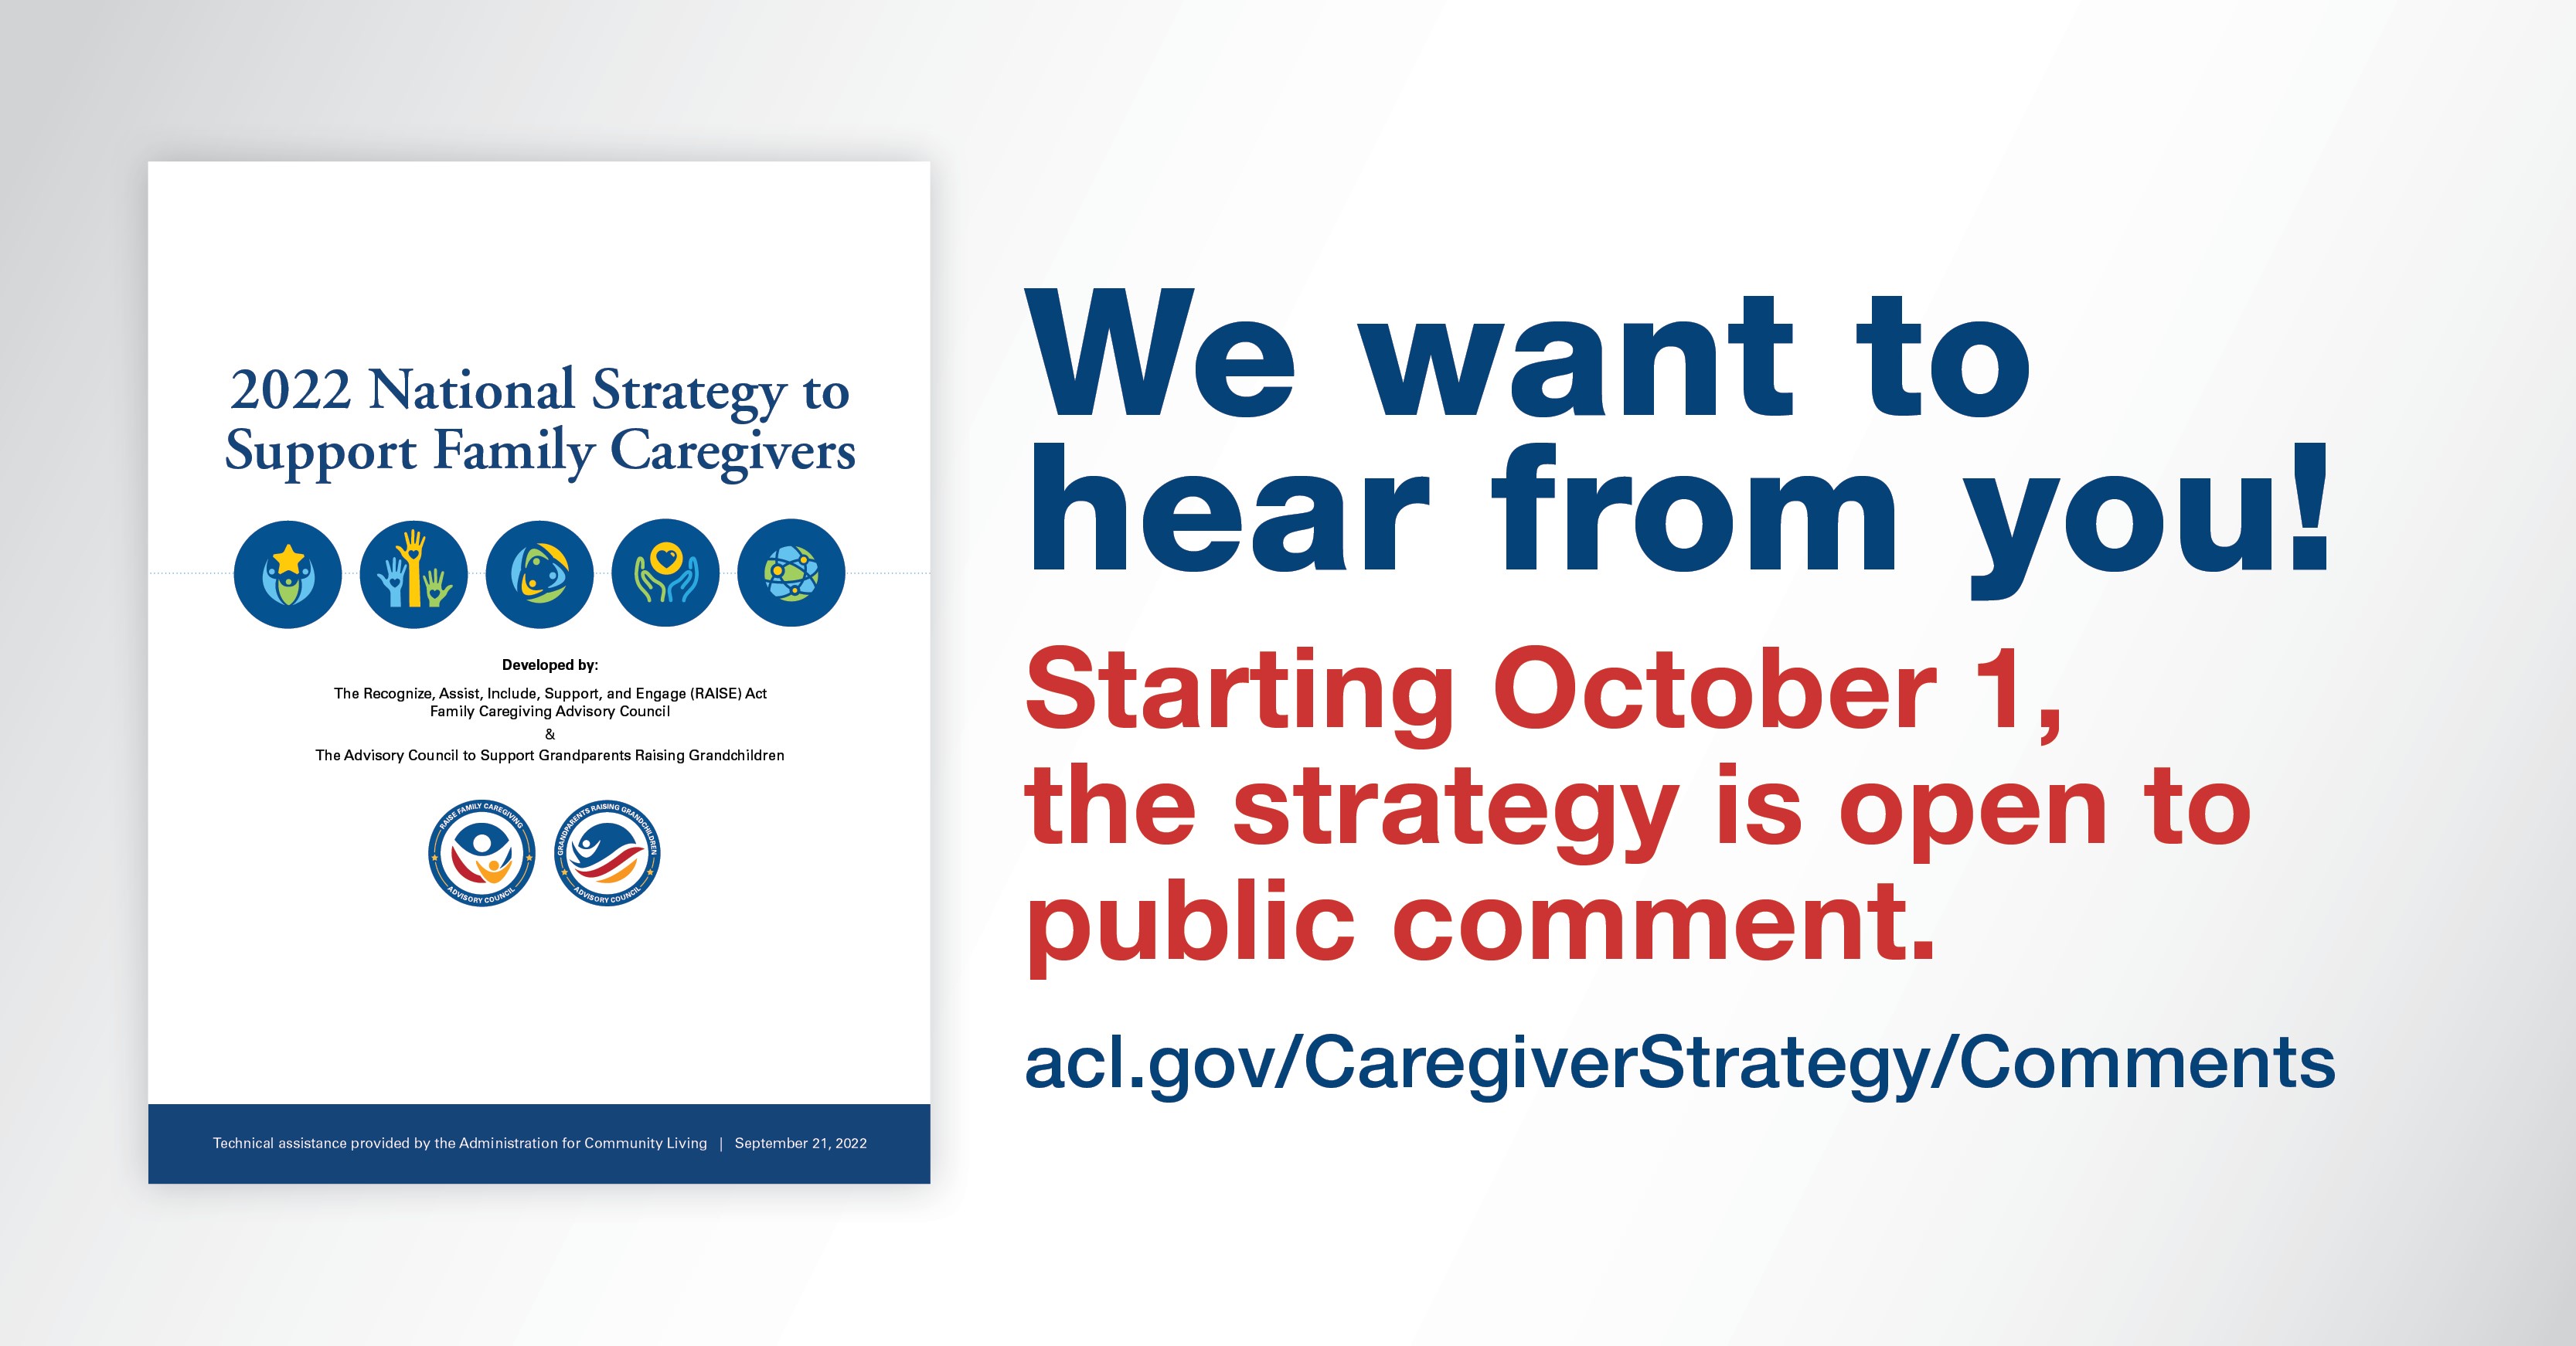 We want to hear from you! Starting October 1, the strategy is open to public comment. acl.gov/CaregiverStrategy/Comments